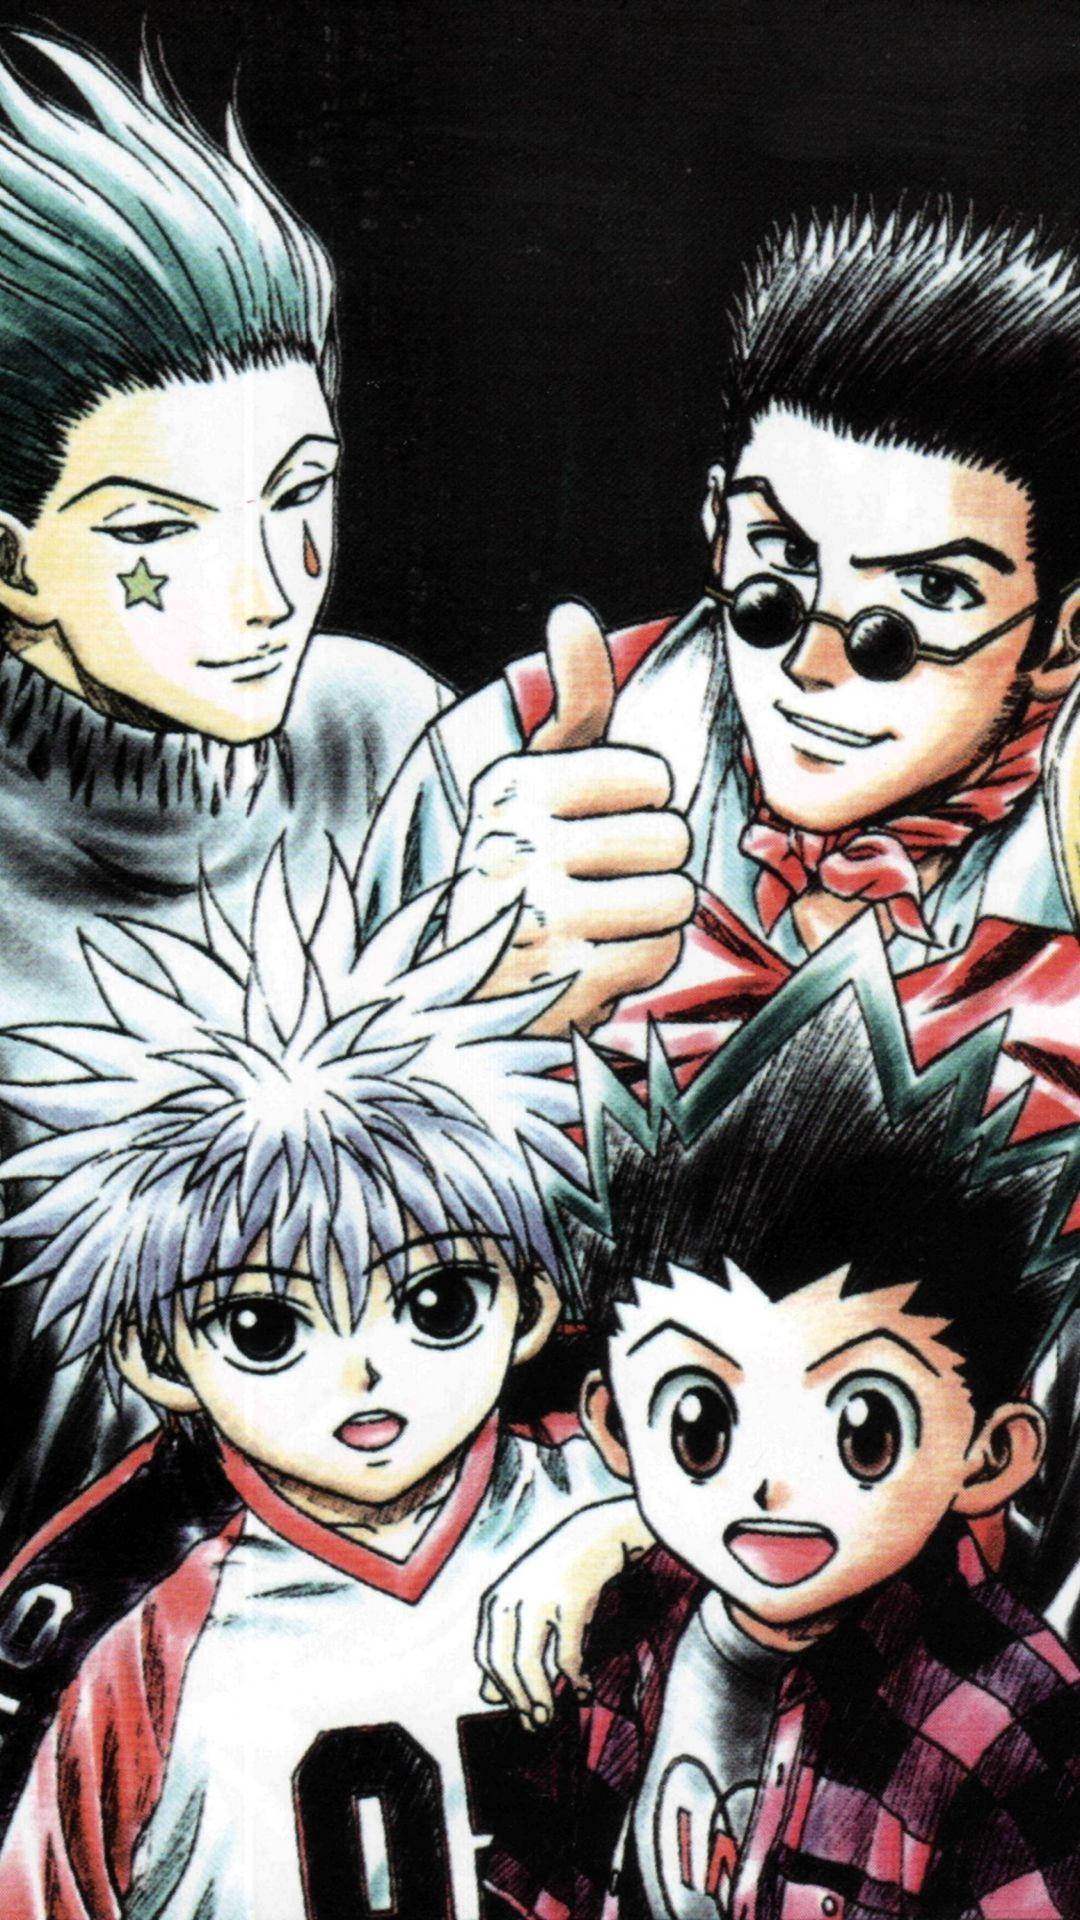 Gon Freecss, the protagonist of Hunter X Hunter, activates his "Rising Dragon" attack Wallpaper